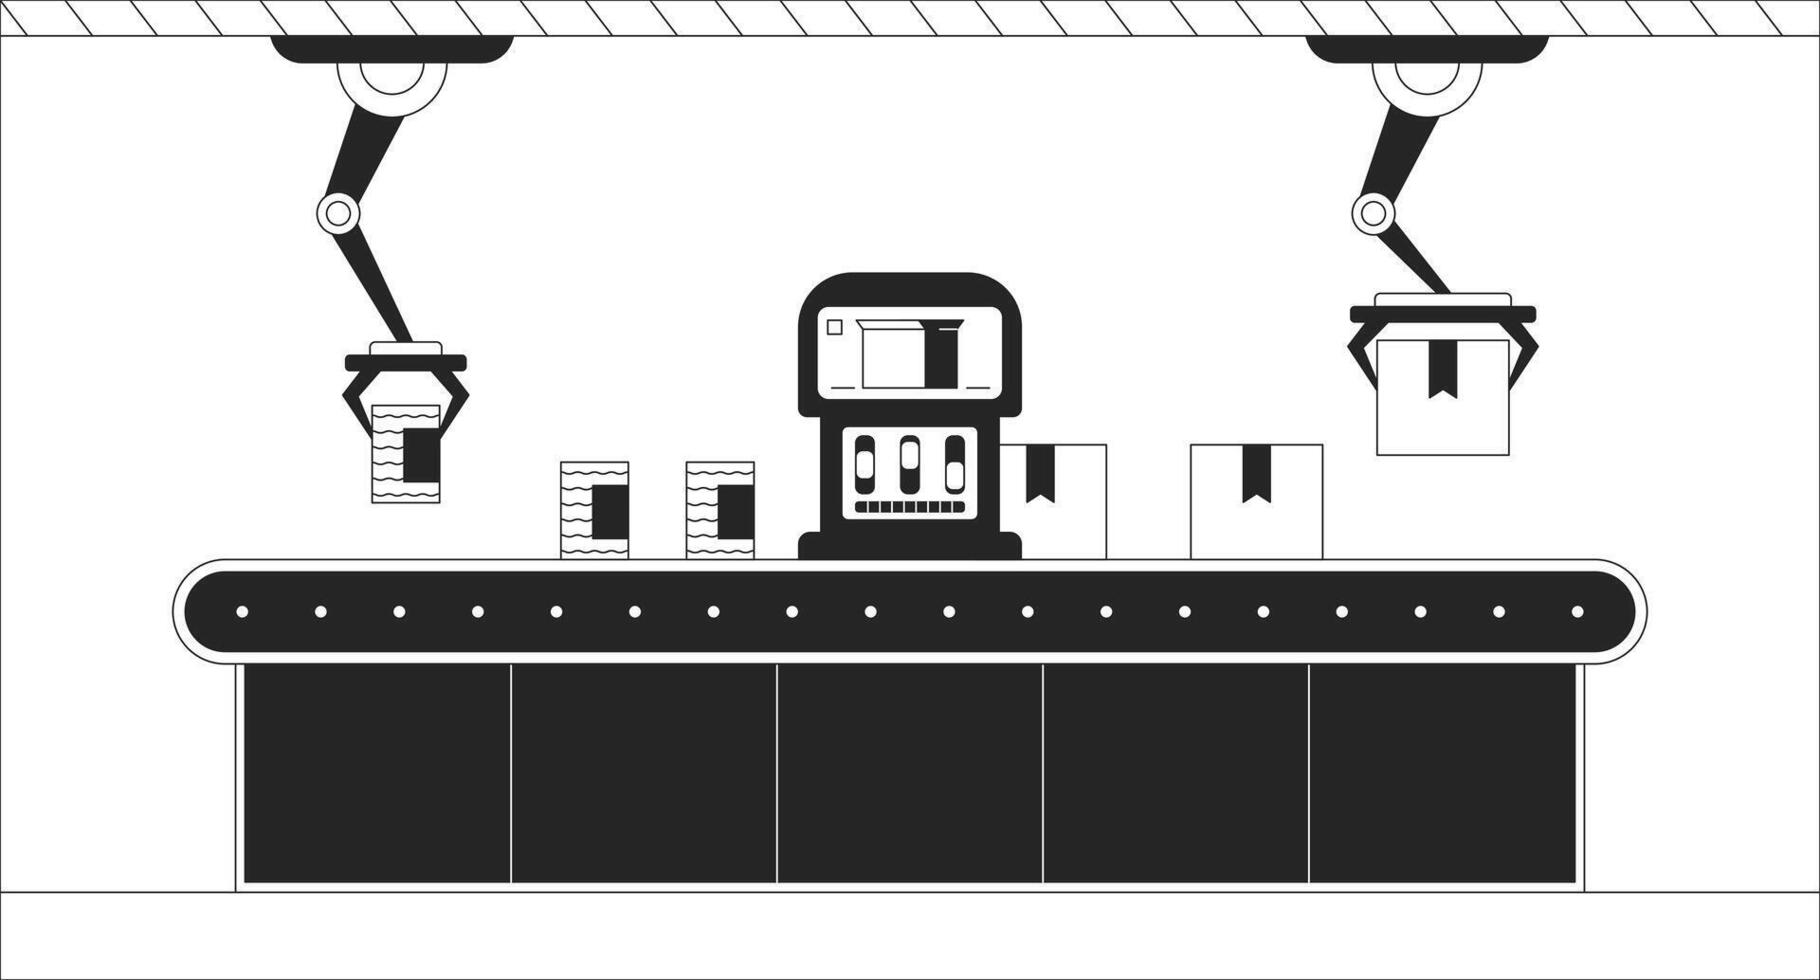 Robotic automation black and white line illustration. Robot arms manufacturing 2D interior monochrome background. Industry 4 0. Factory assembly line boxes packaging outline scene image vector